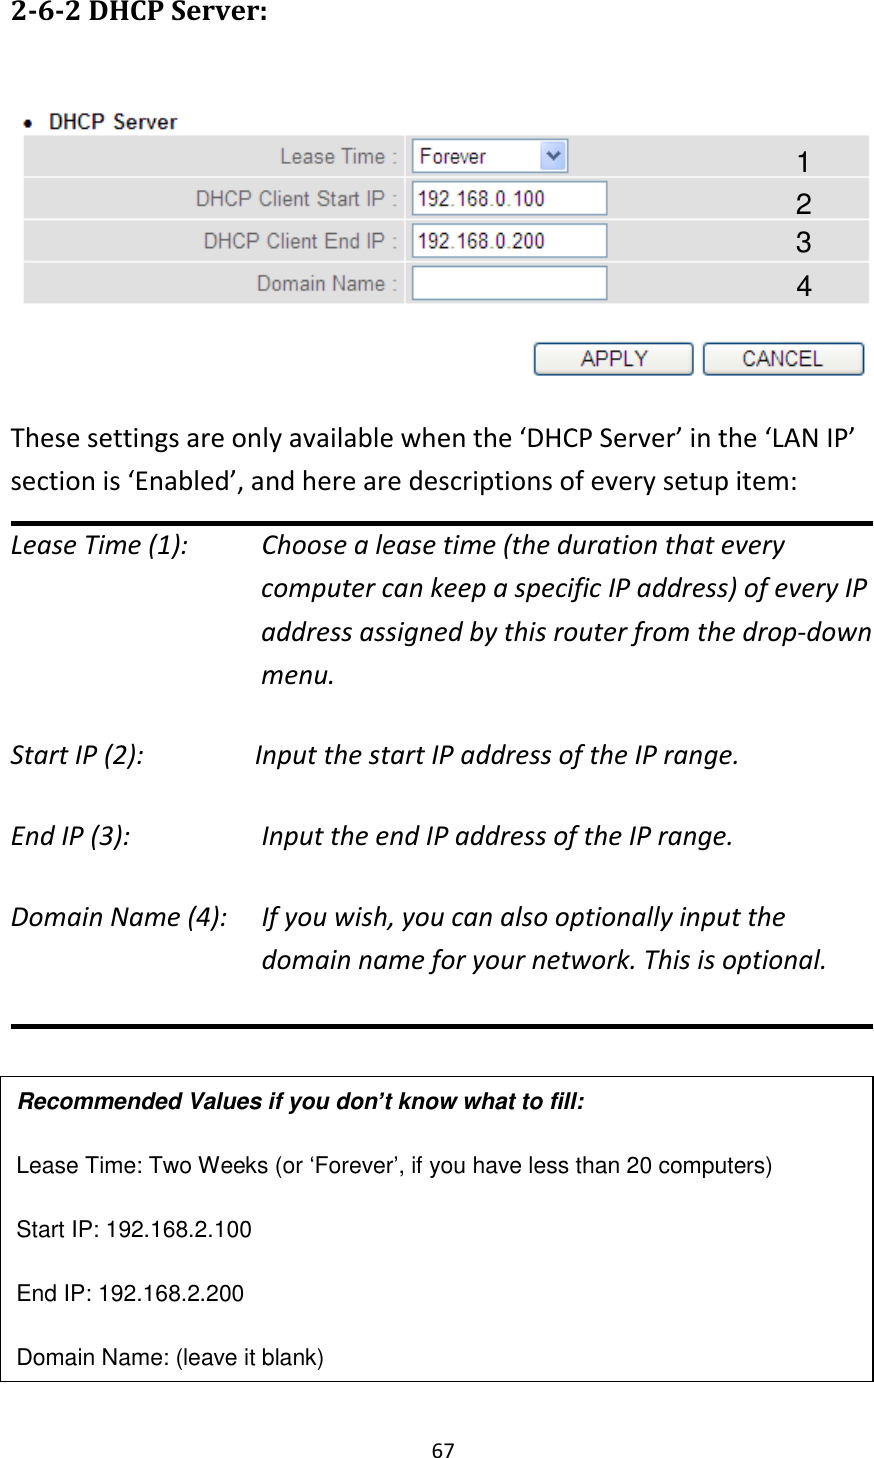 67 2-6-2 DHCP Server:   These settings are only available when the ‘DHCP Server’ in the ‘LAN IP’ section is ‘Enabled’, and here are descriptions of every setup item: Lease Time (1):     Choose a lease time (the duration that every computer can keep a specific IP address) of every IP address assigned by this router from the drop-down menu. Start IP (2):        Input the start IP address of the IP range. End IP (3):        Input the end IP address of the IP range. Domain Name (4):    If you wish, you can also optionally input the domain name for your network. This is optional.        Recommended Values if you don’t know what to fill: Lease Time: Two Weeks (or ‘Forever’, if you have less than 20 computers) Start IP: 192.168.2.100 End IP: 192.168.2.200 Domain Name: (leave it blank) 1 3 4 2 